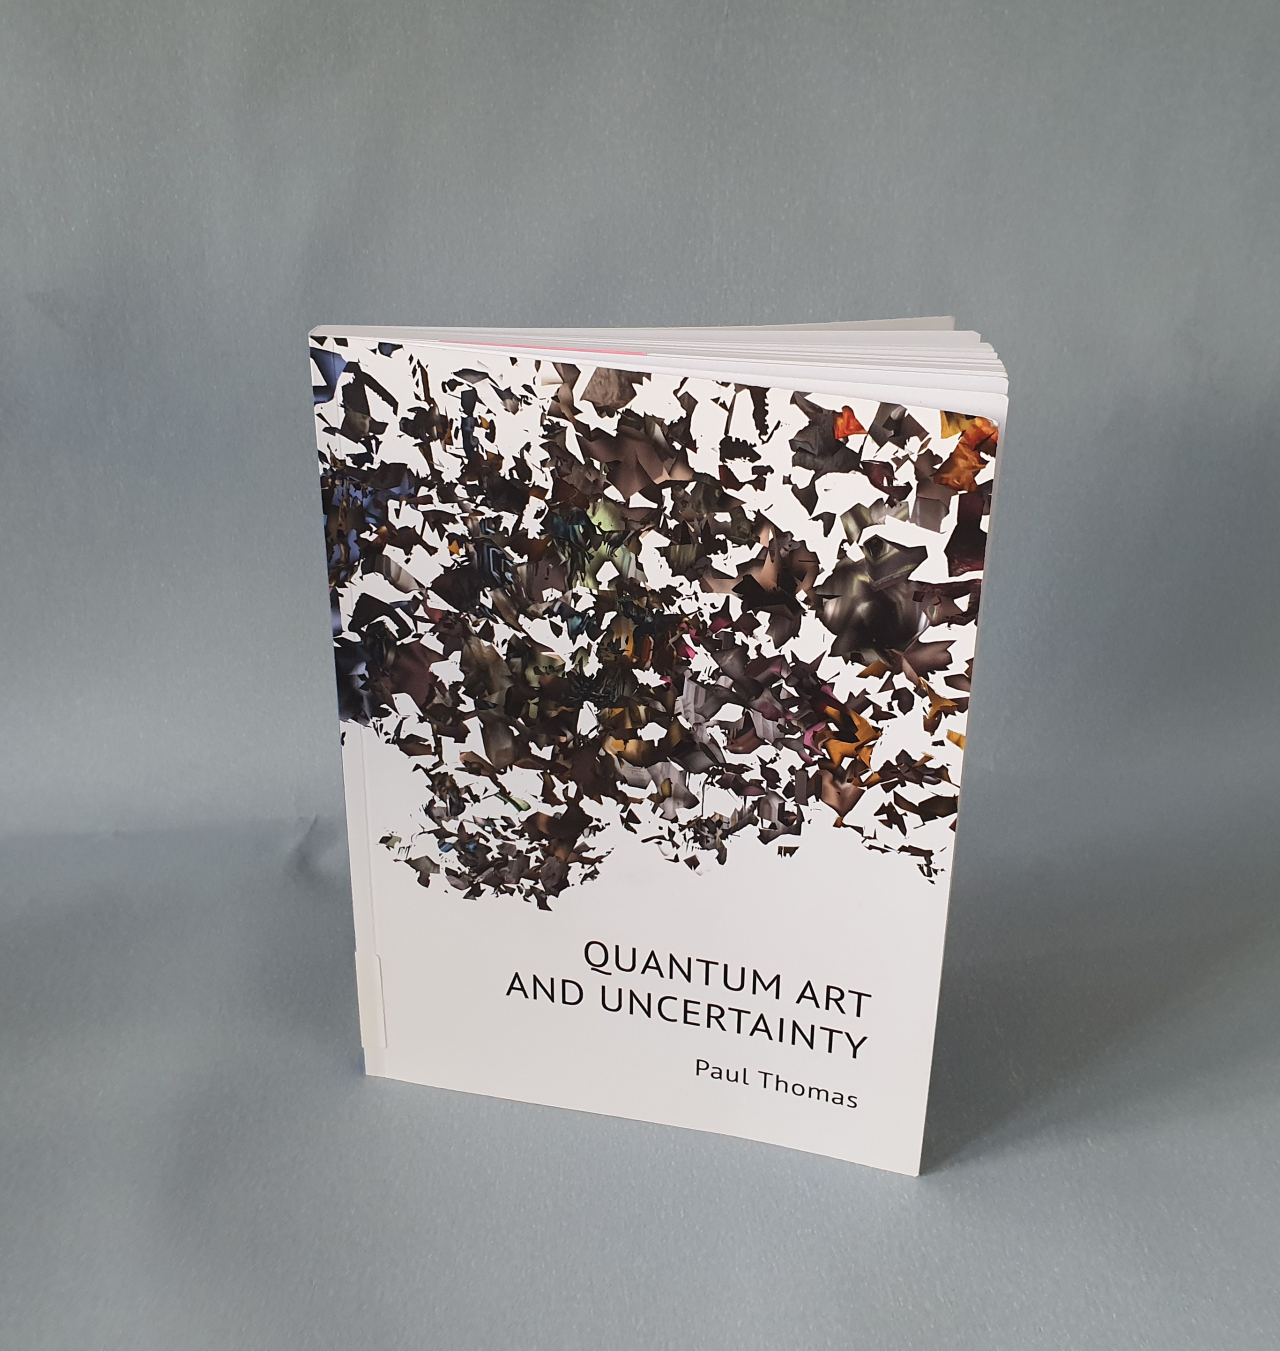 you can see the book »quantum art and uncertatinty« by paul thomas, standing, slightly open, against a blue-grey background.